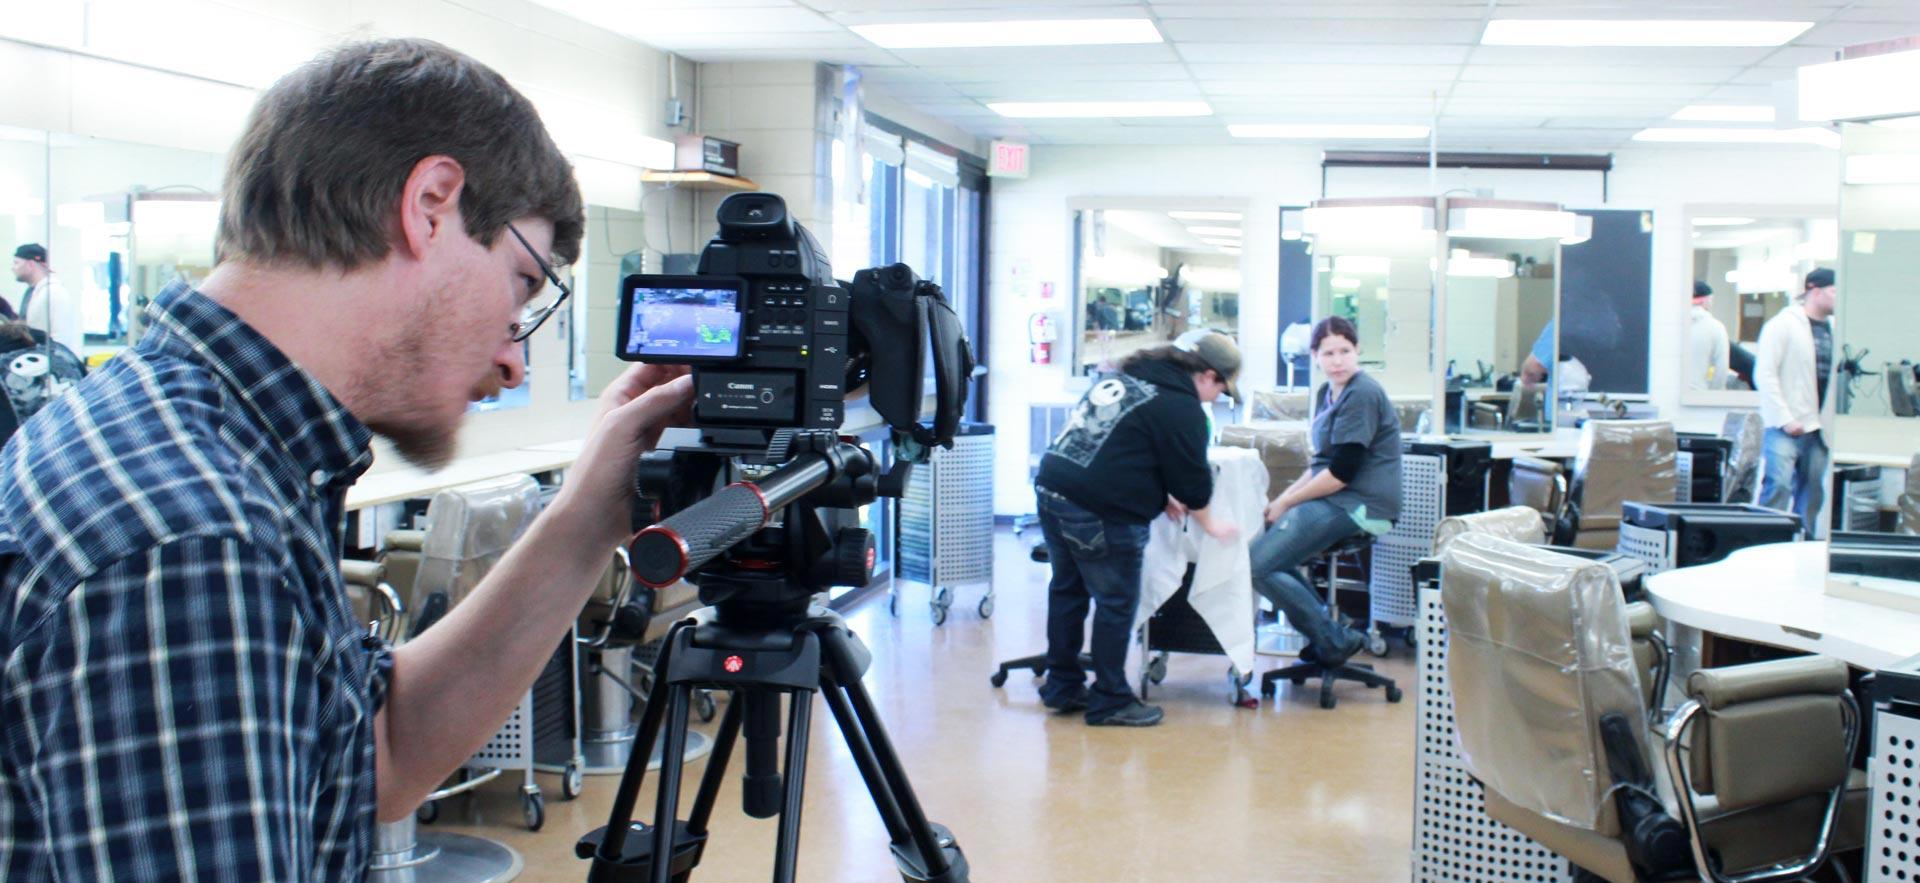 Male digital video student shoots video in the о hairstyling salon.